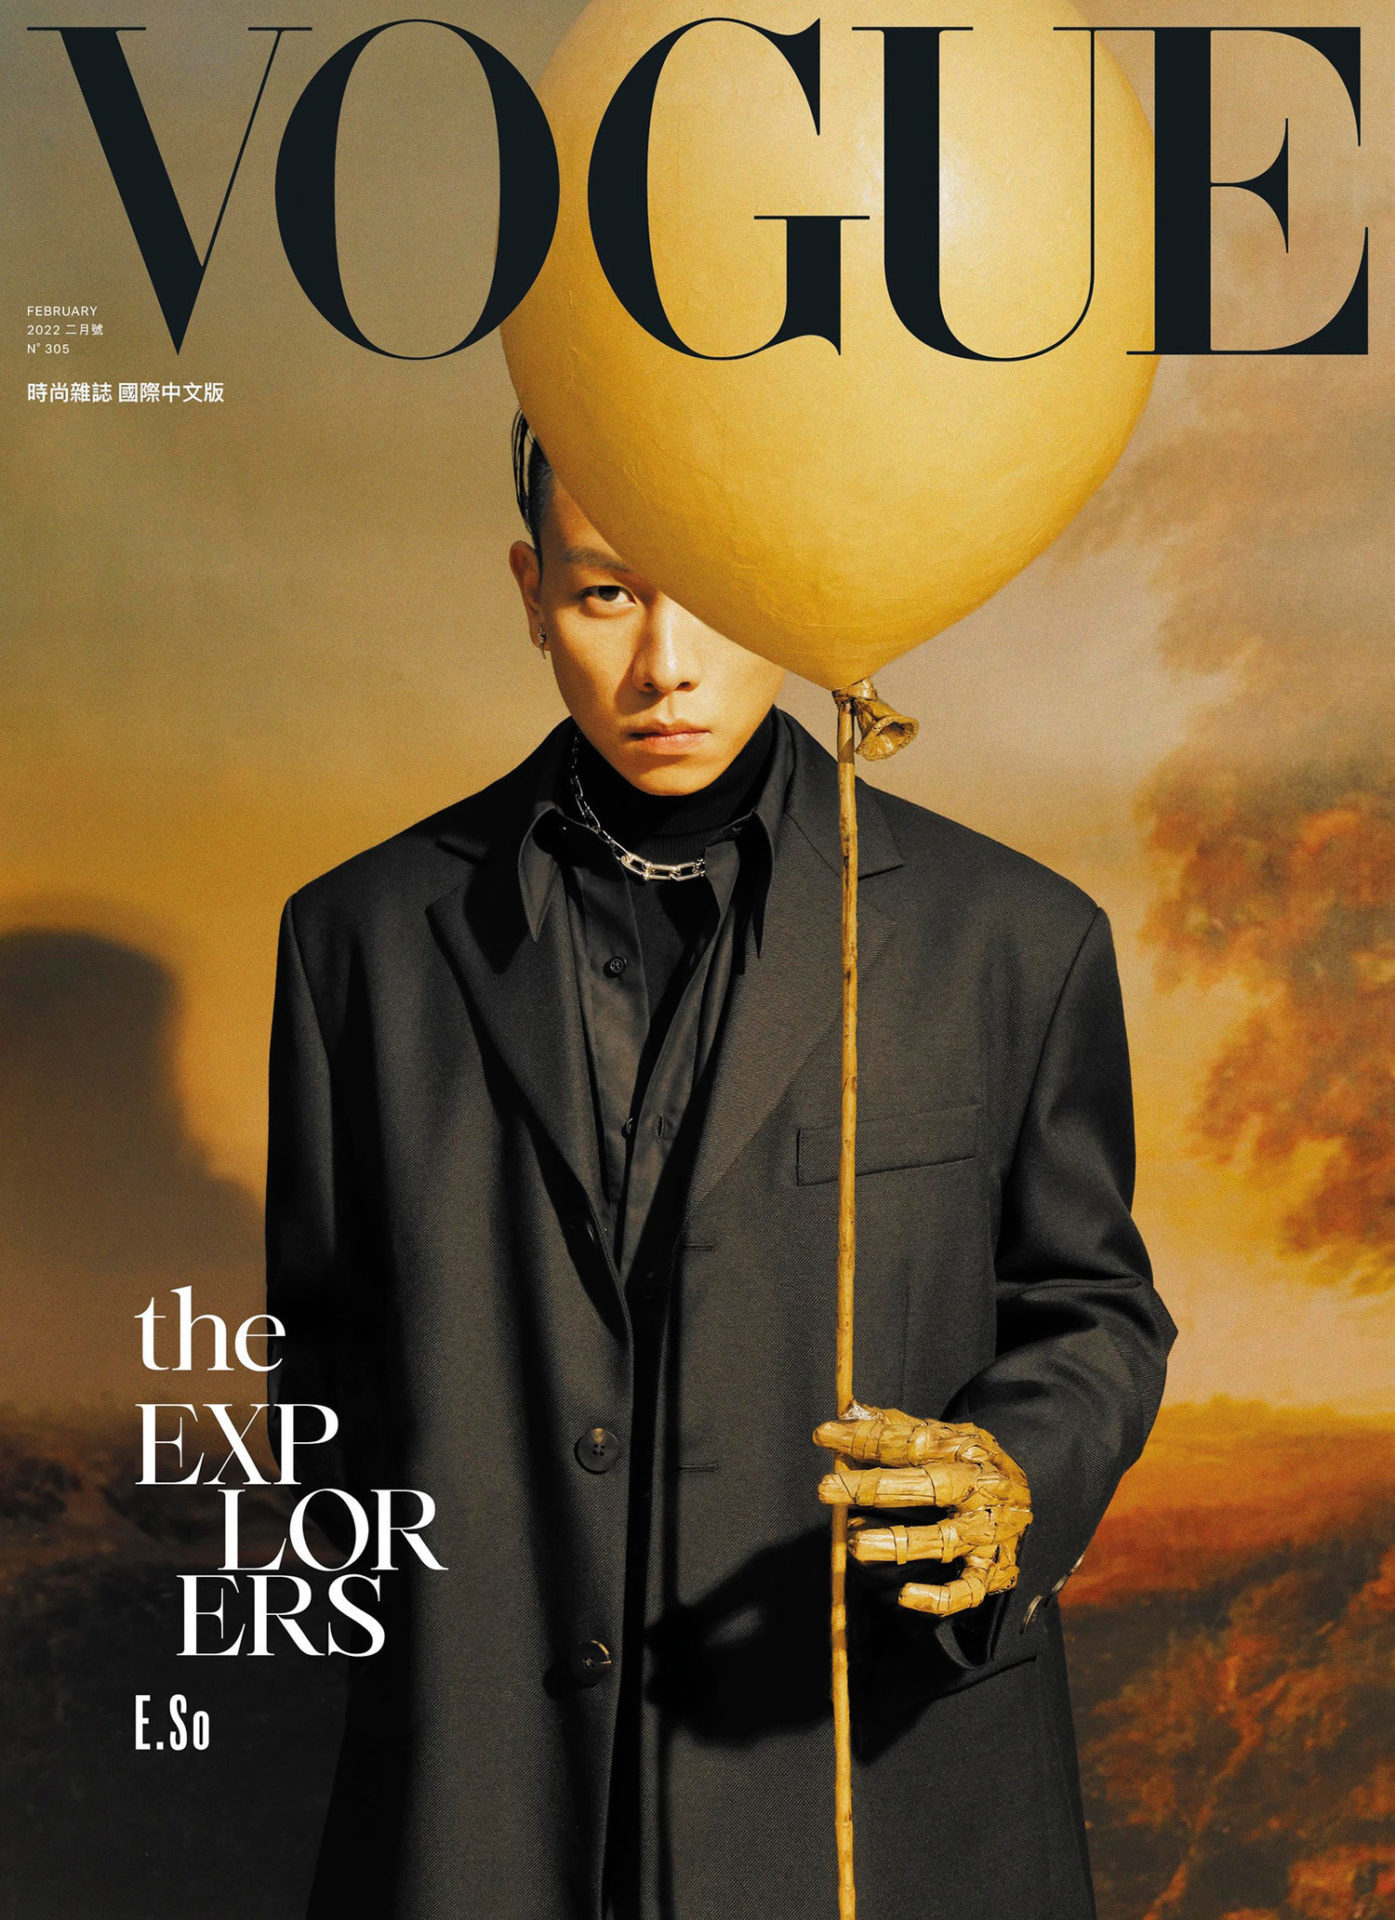 E.so covers Vogue Taiwan February 2022 by Poyenchen